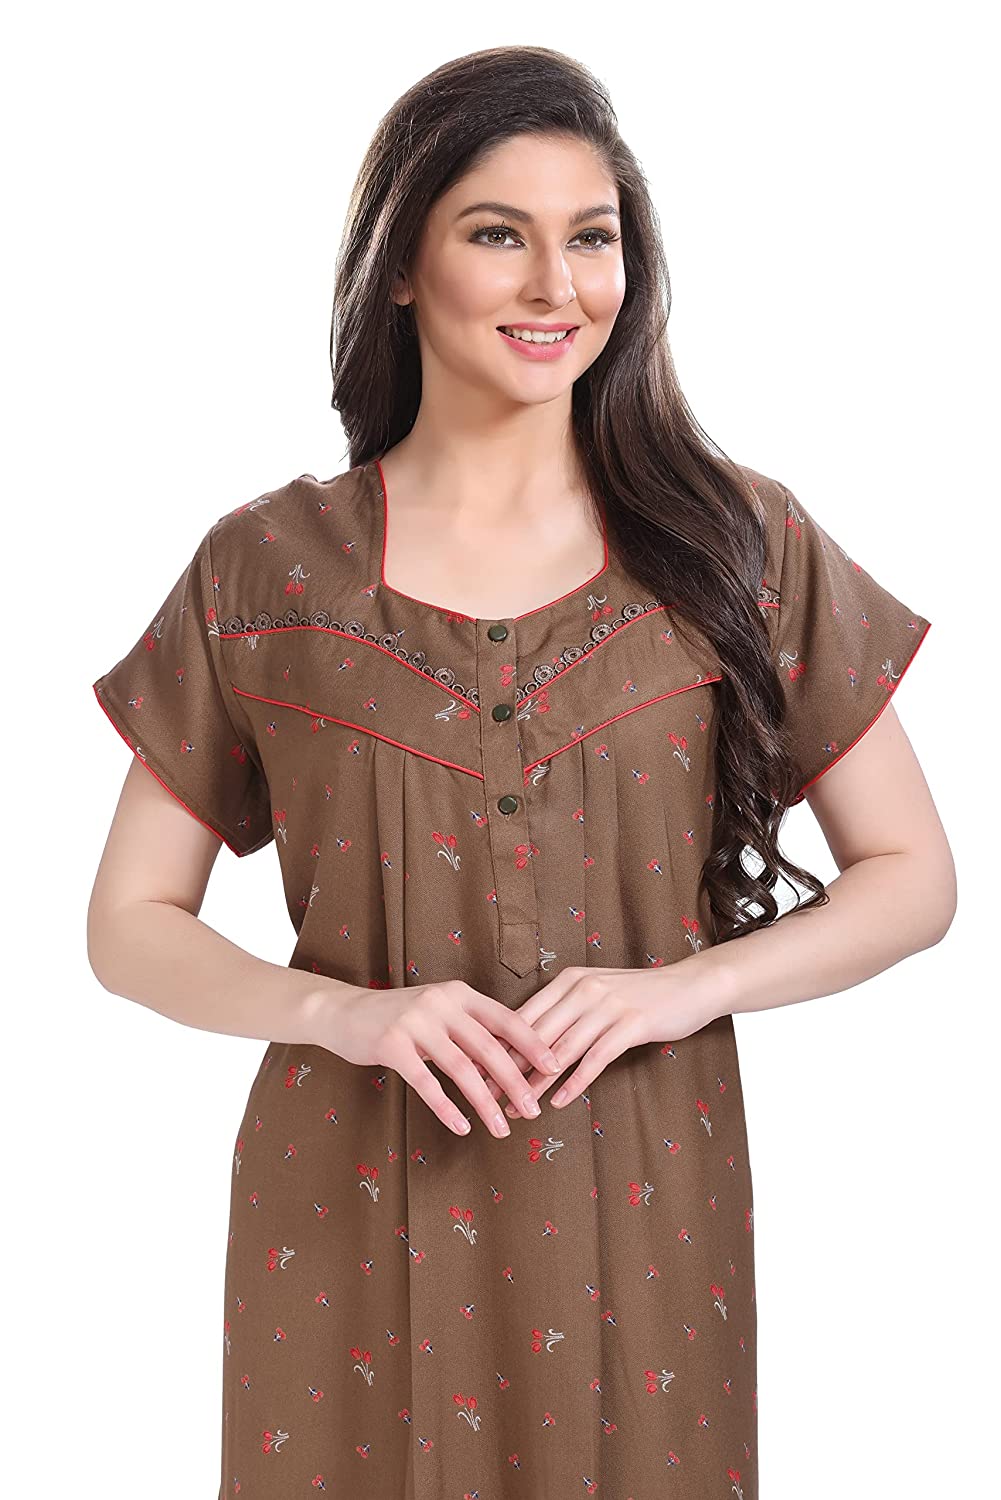 Buy Elady Women's Soft Hosiery Cotton Maxi Round Neck Front Button Full  Length Nightwear Gown Nighty Sleepwear for Ladies Super Soft Comfortable  Design. Free Size Brown at Amazon.in